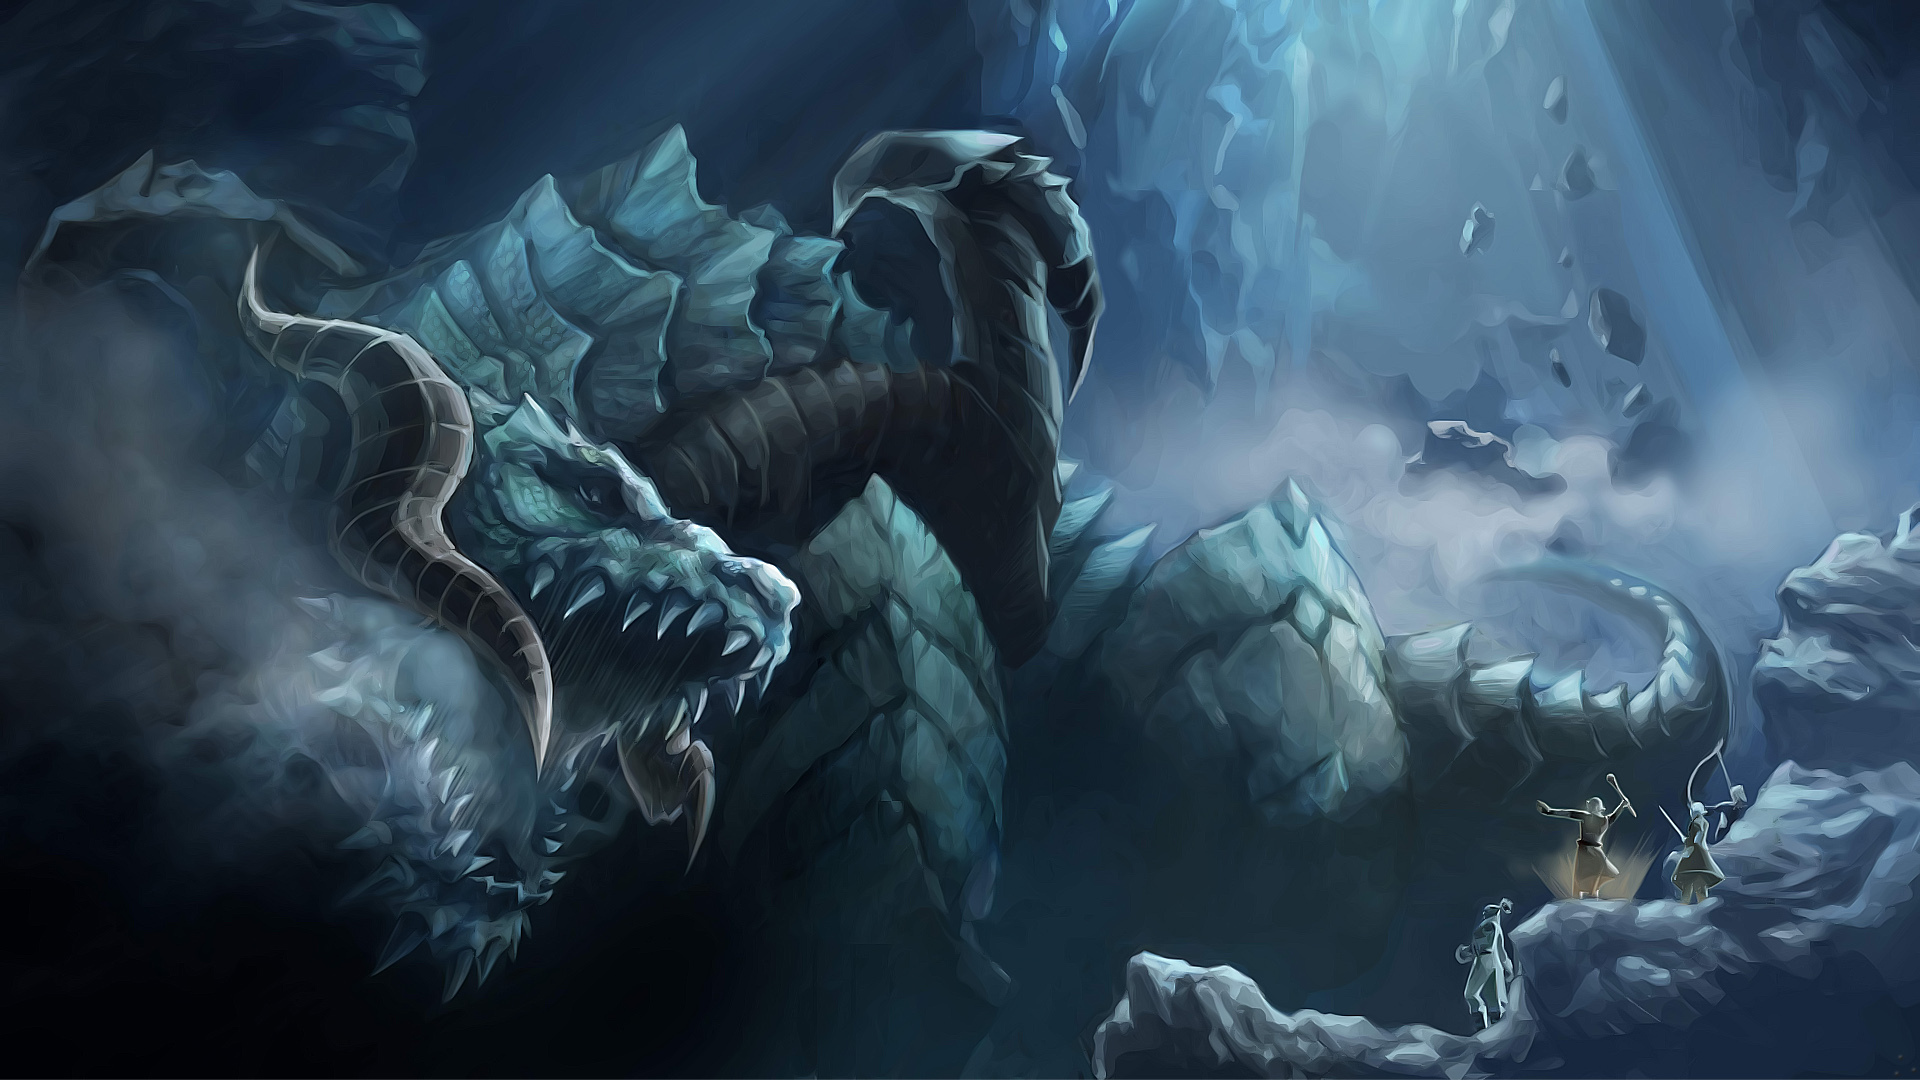 Powerful dragon in a mystical cave, guarded by warriors from different races in a video game.